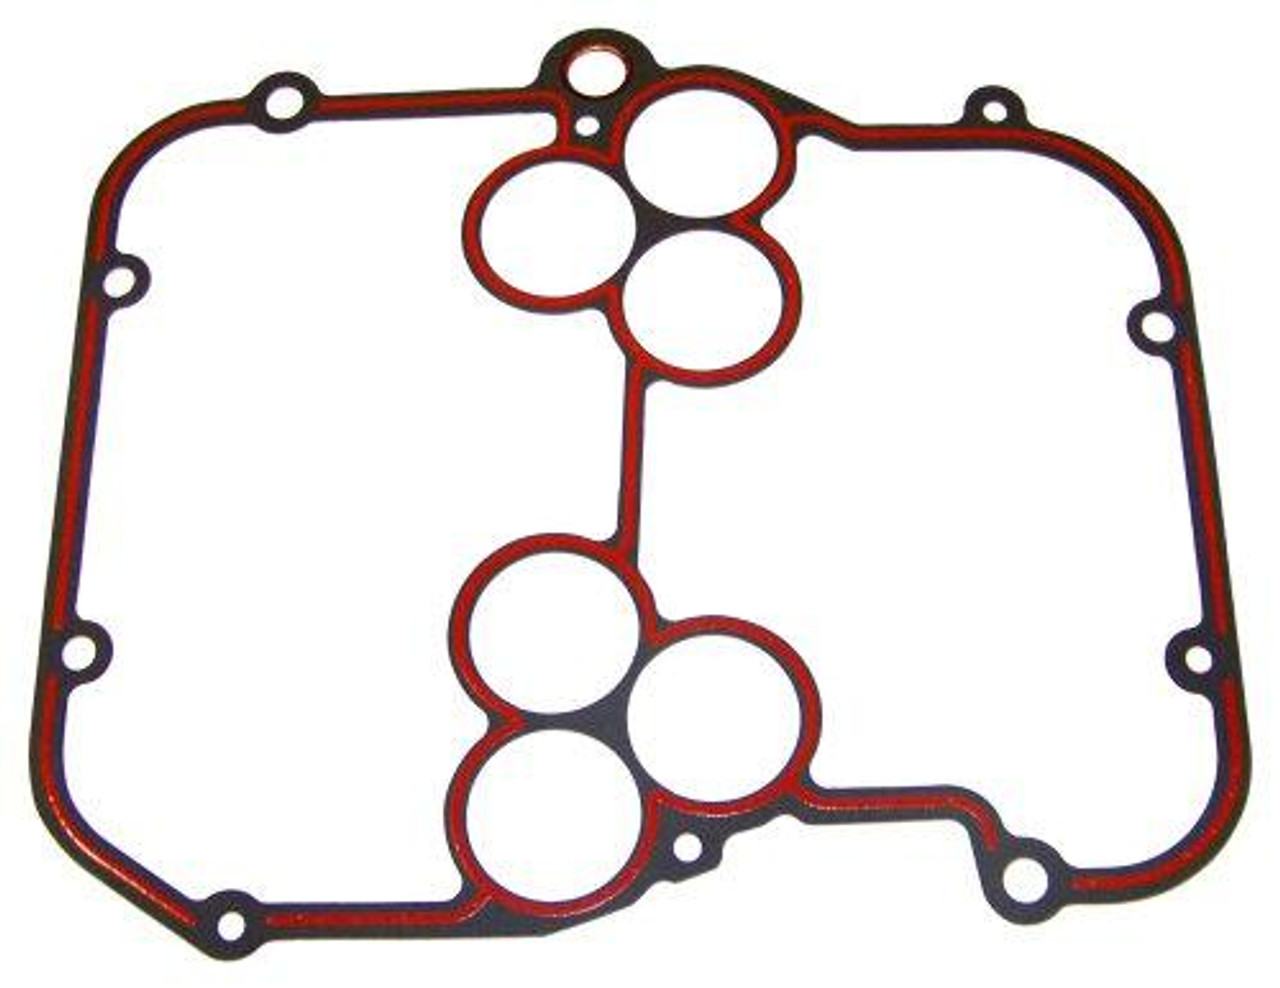 1992 Chevrolet Astro 4.3L Fuel Injection Plenum Gasket MG3127EP1